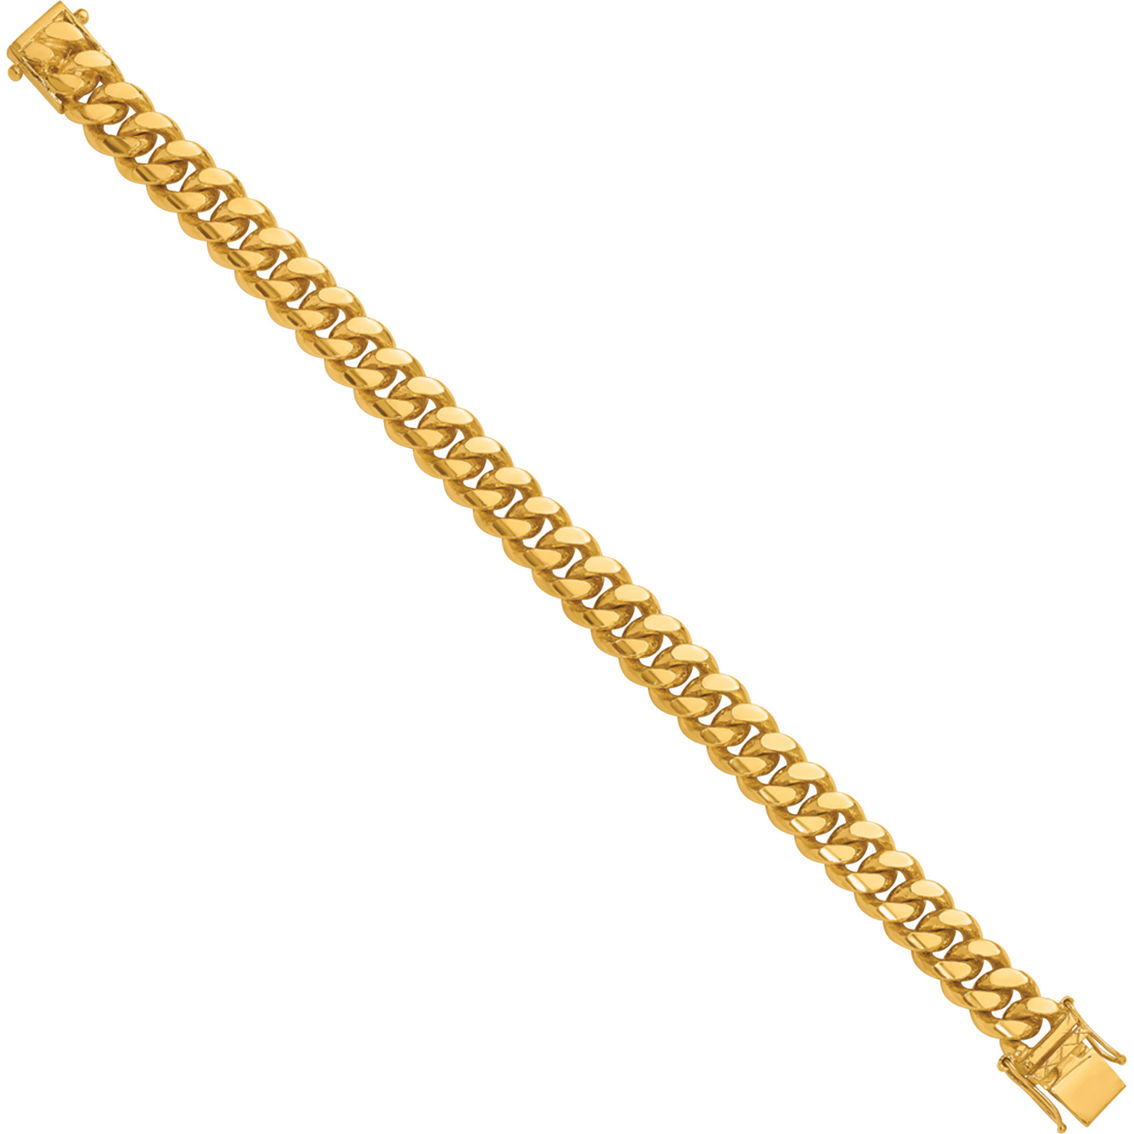 24K Pure Gold 24K Yellow Gold 12mm Solid Curb 8.5 in. Chain Bracelet - Image 3 of 5